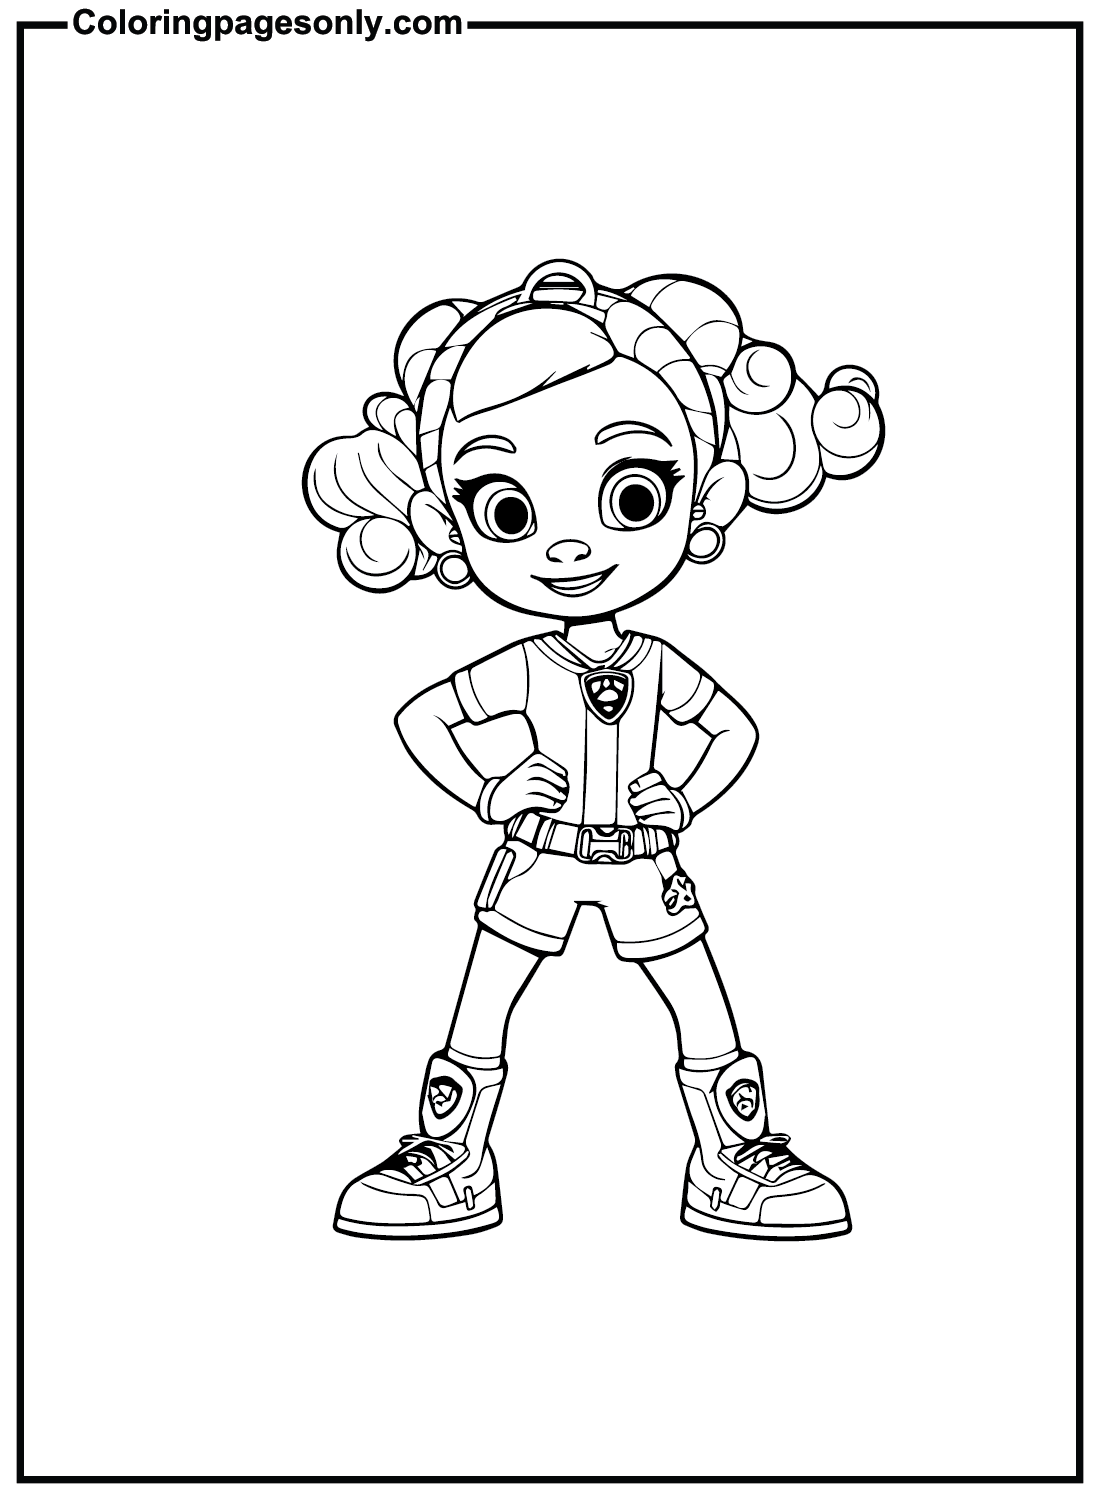 Adorable Rainbow Rangers Coloring Pages